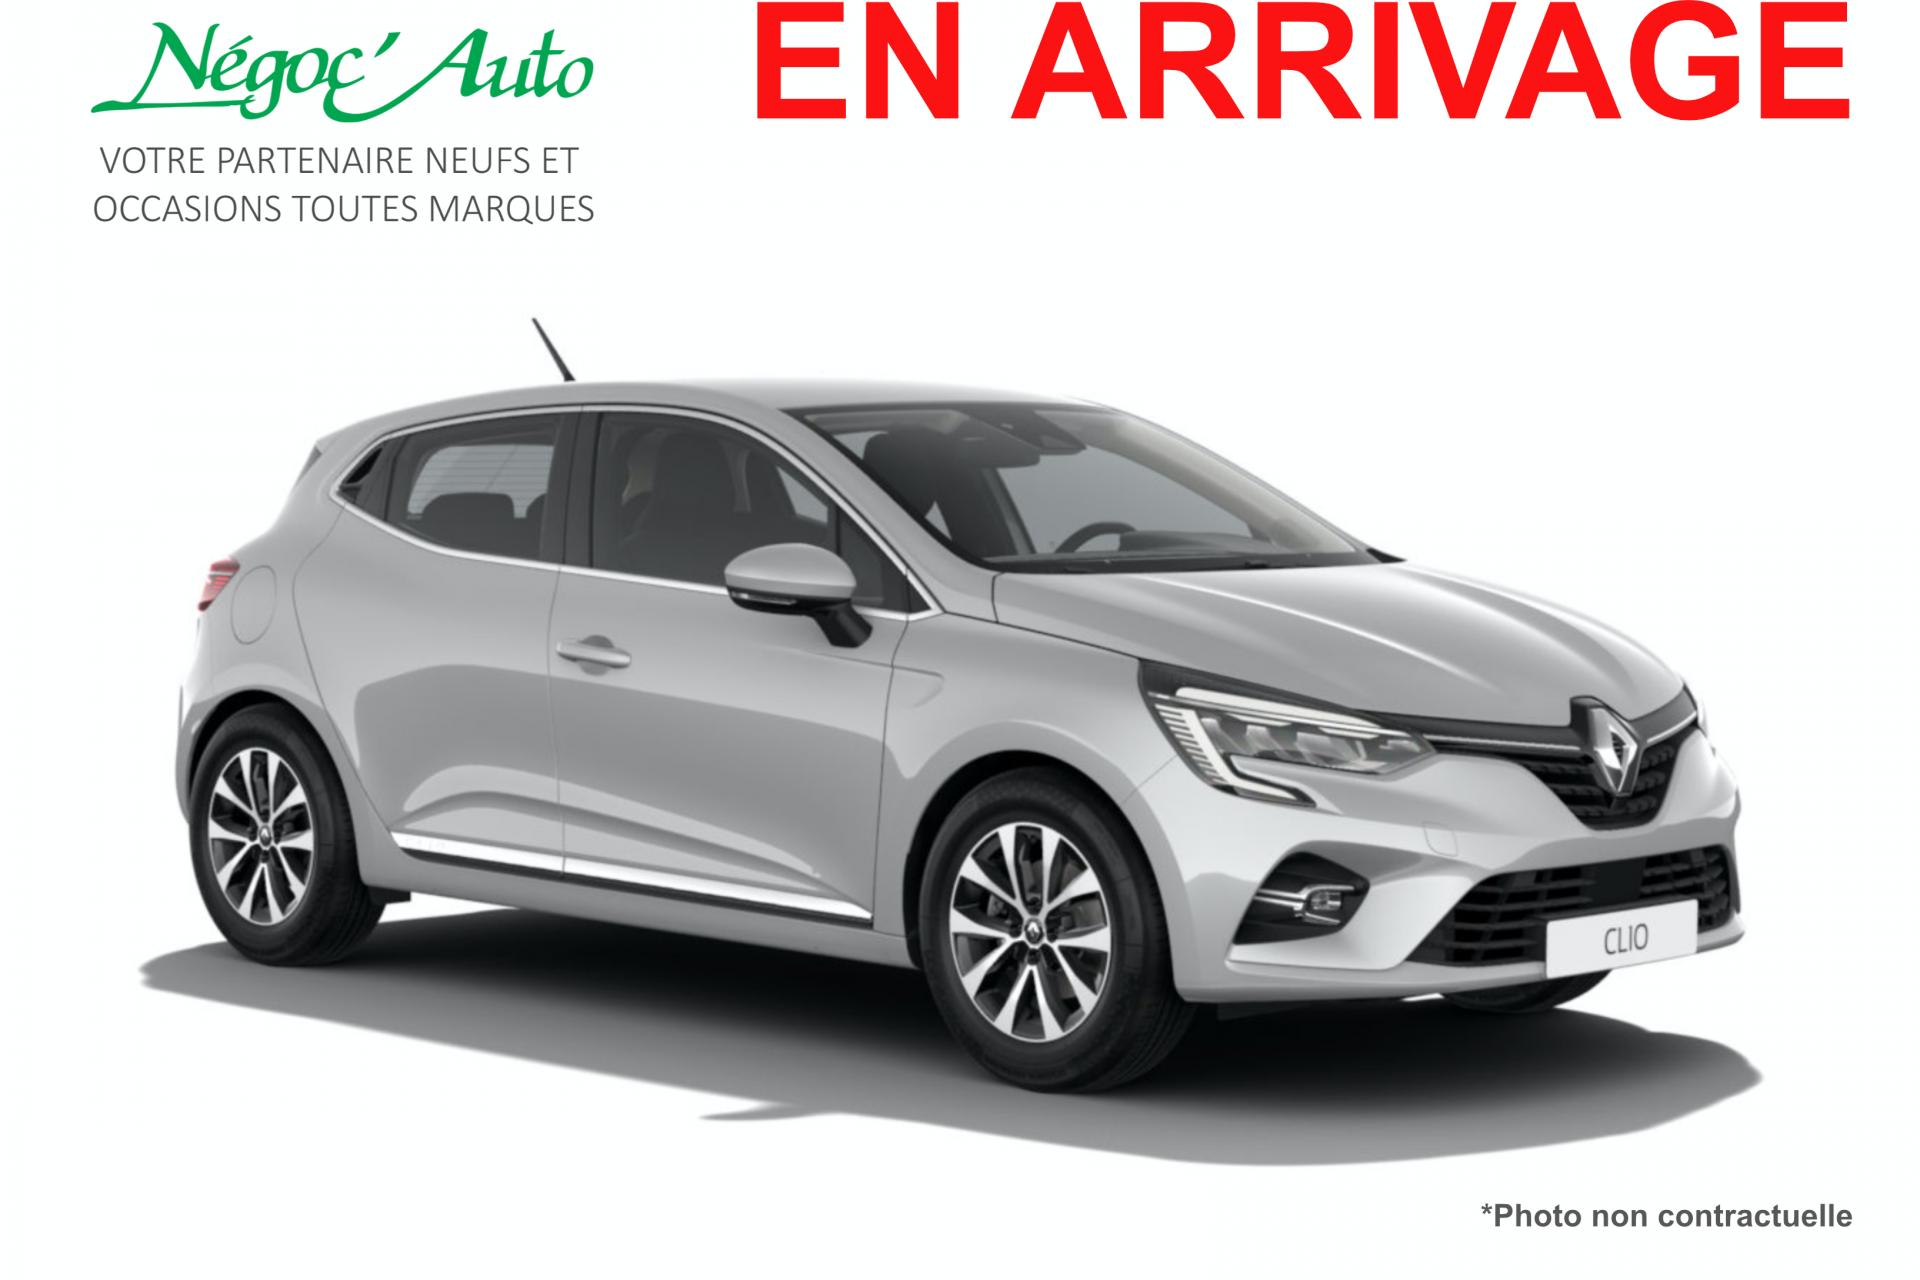 Clio 5 intens Edition one 1.0 tce 100 ch - Voitures